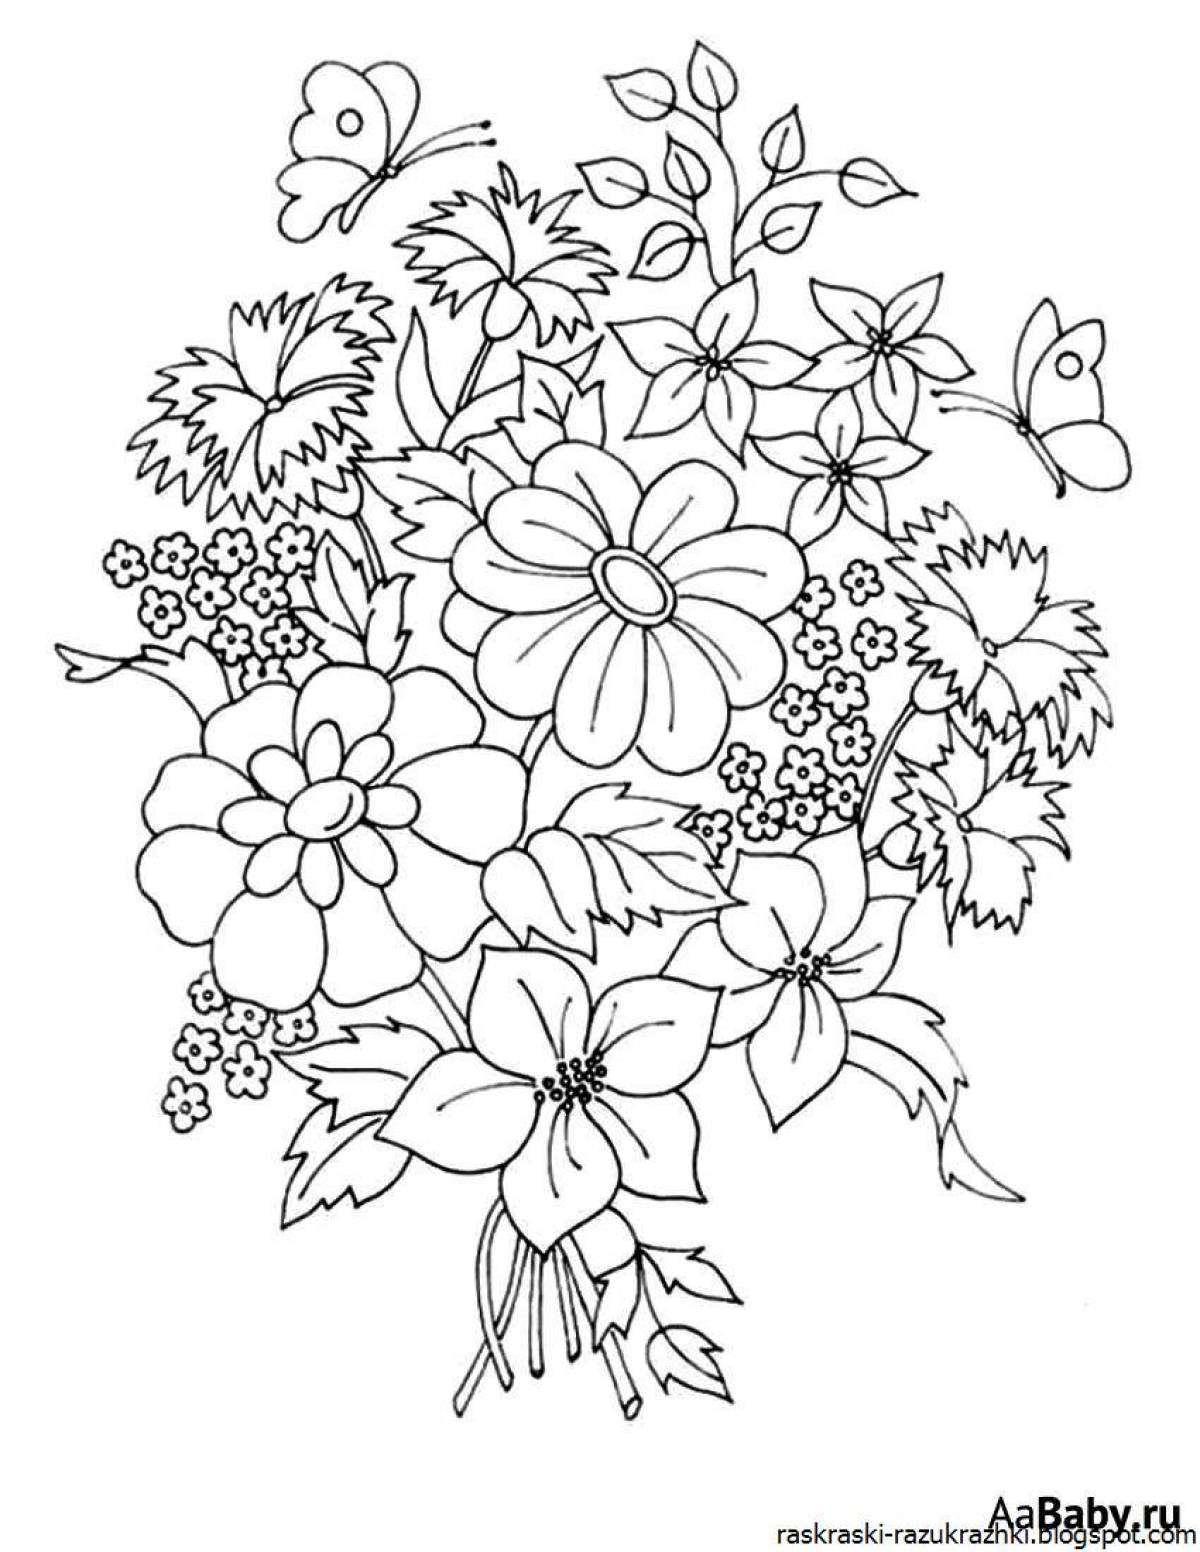 Coloring bouquet of flowers